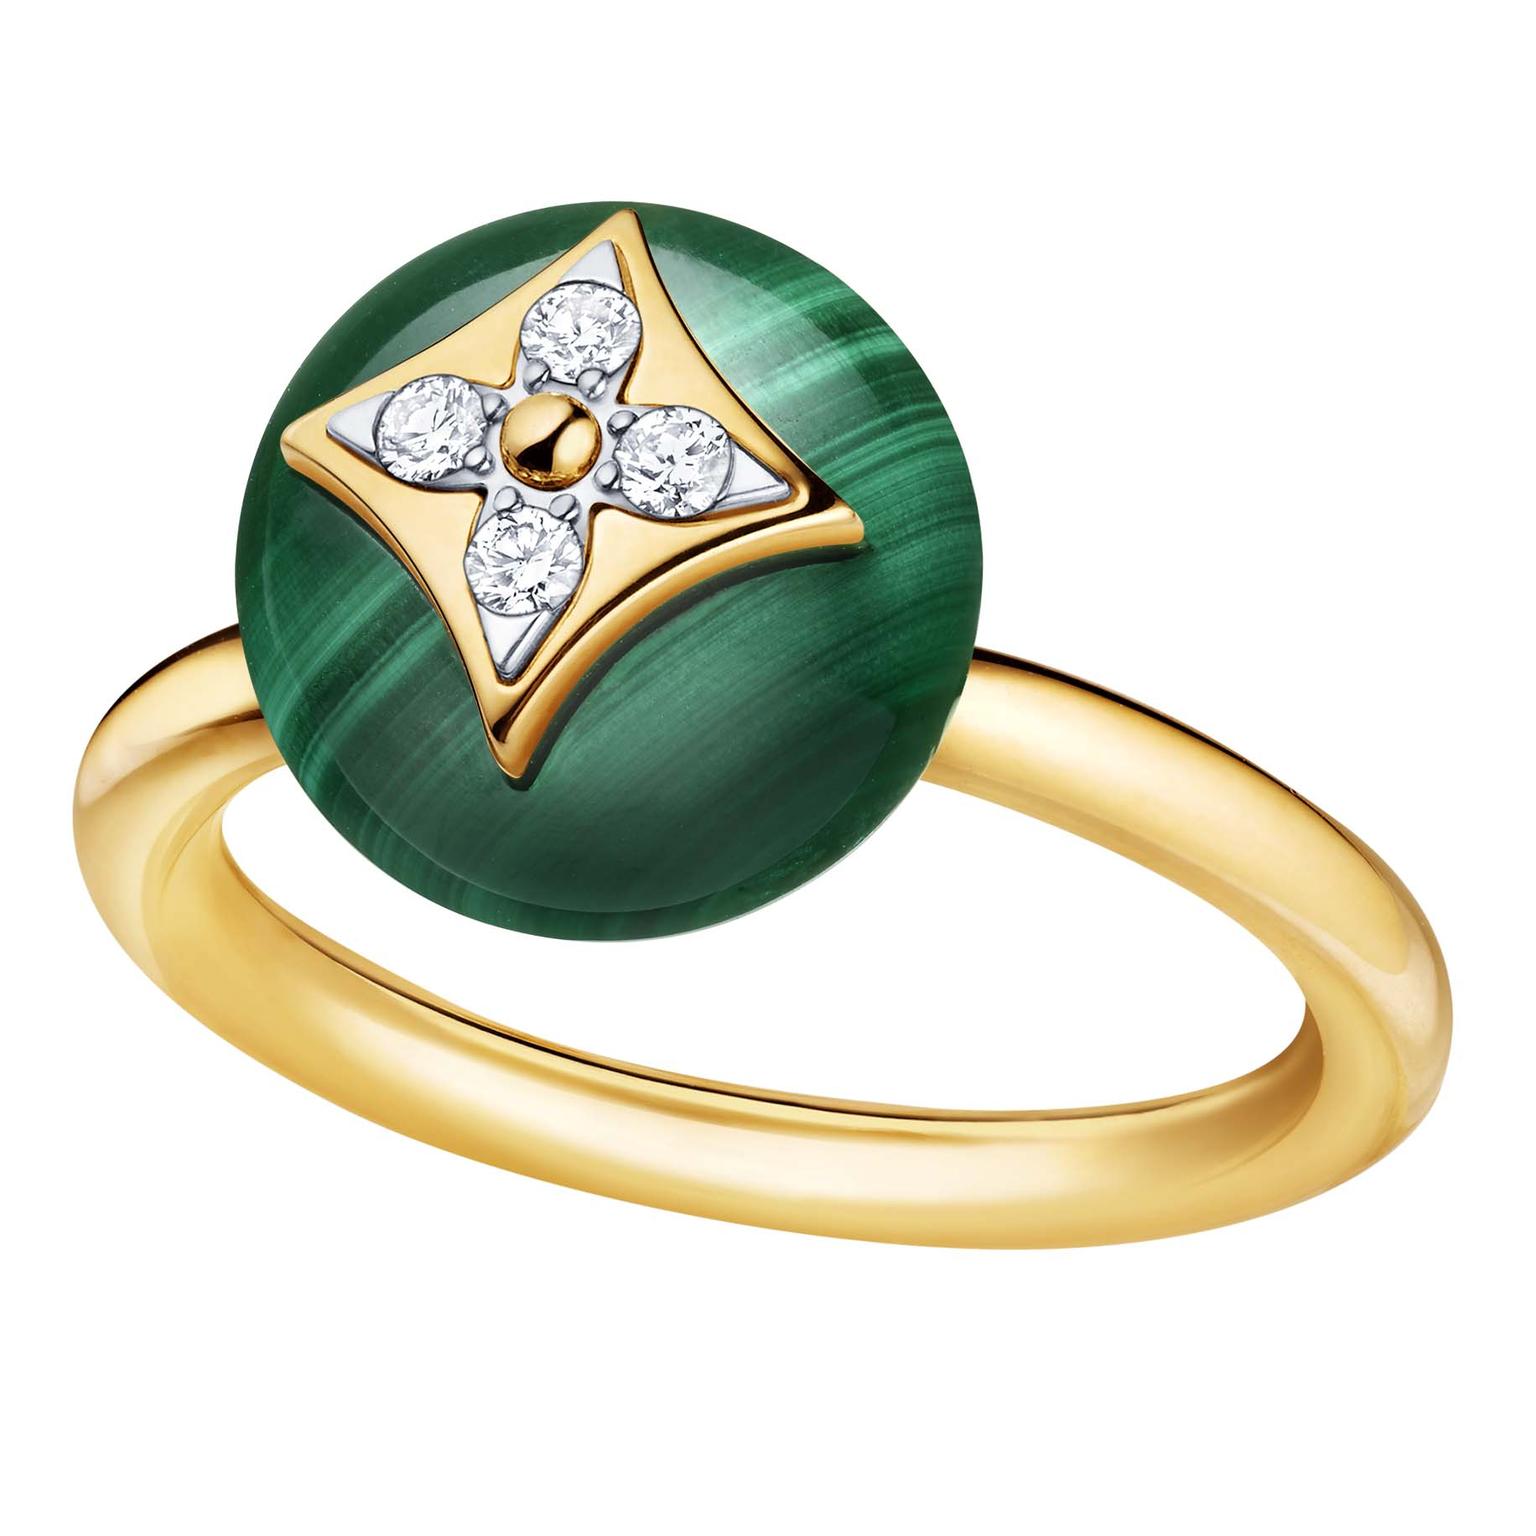 Louis Vuitton B.Blossom yellow gold ring in malachite | Louis Vuitton | The Jewellery Editor